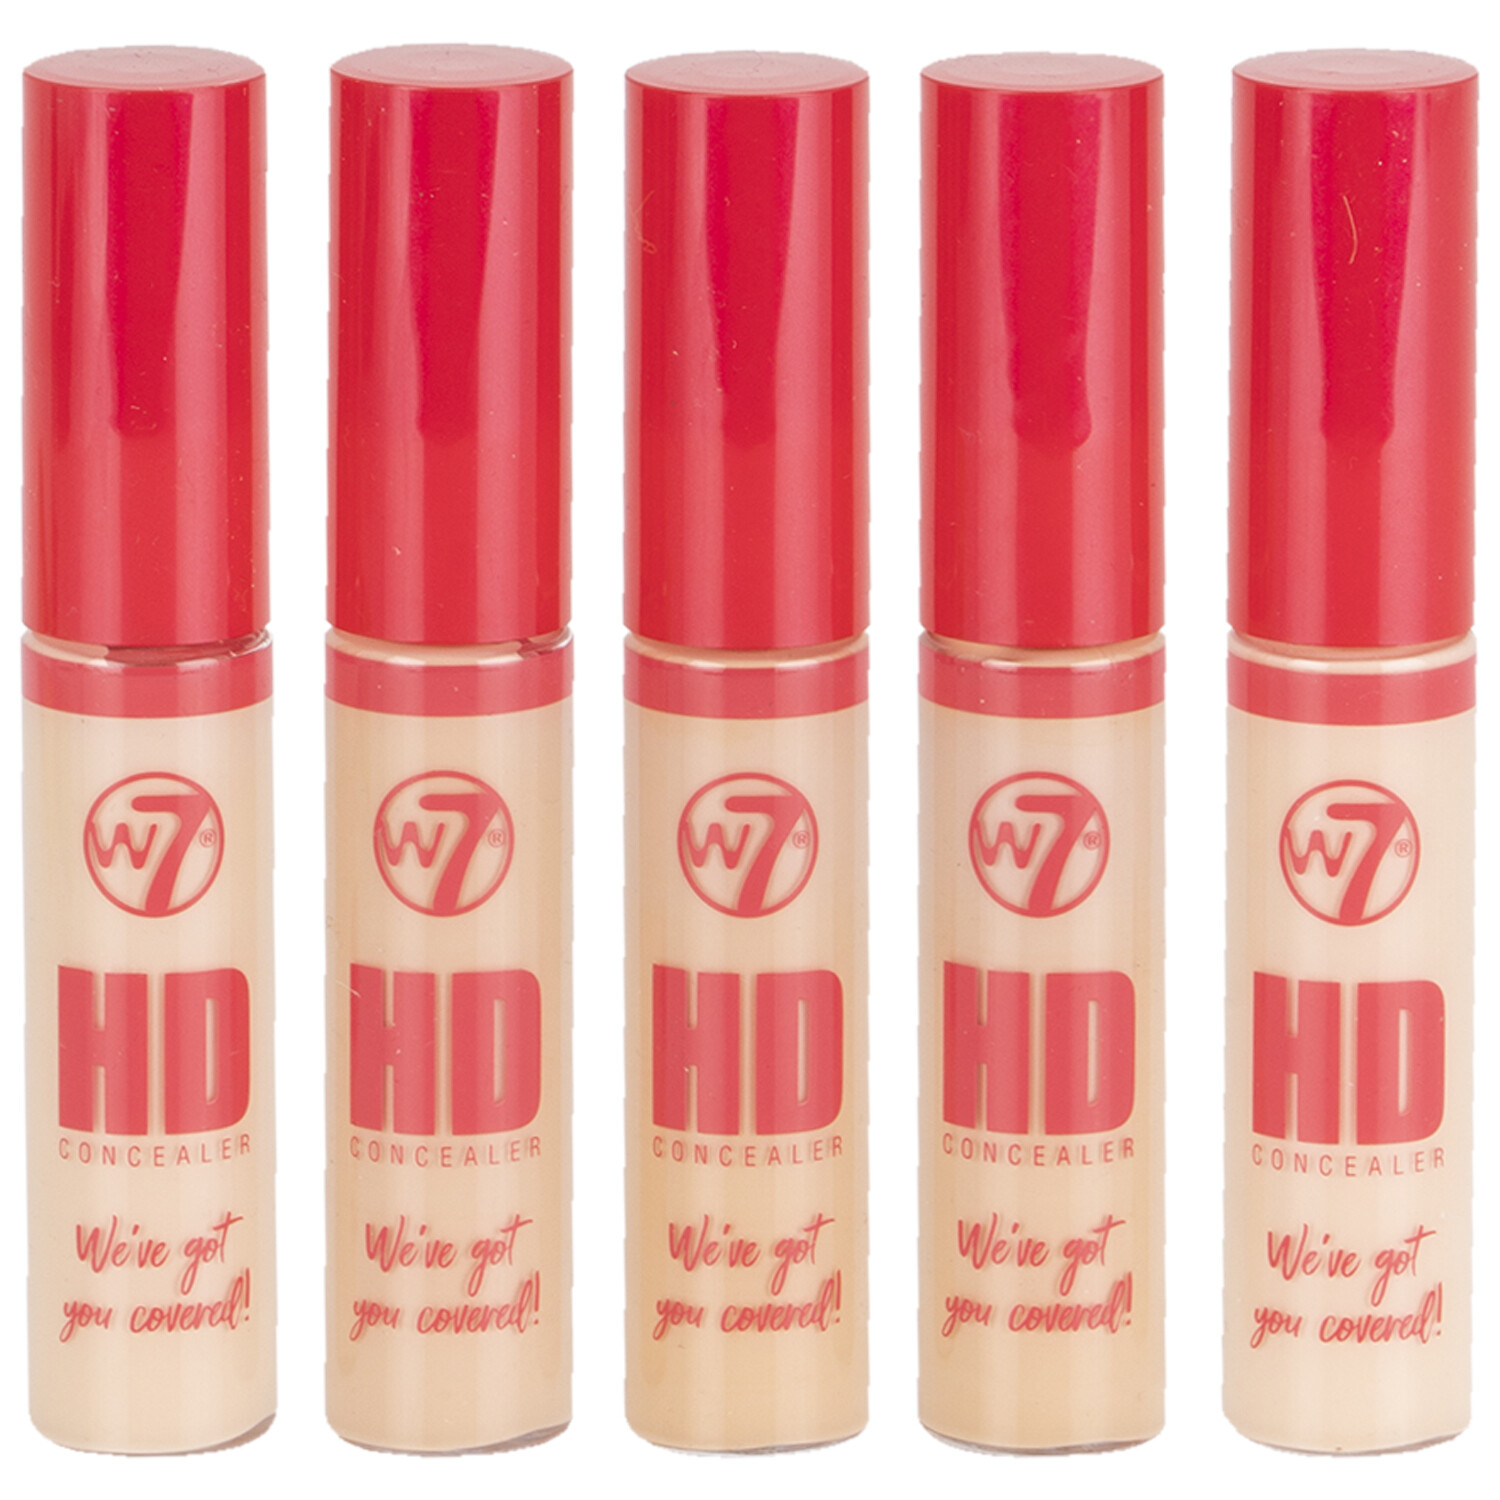 W7 Fair and Light HD Concealer Image